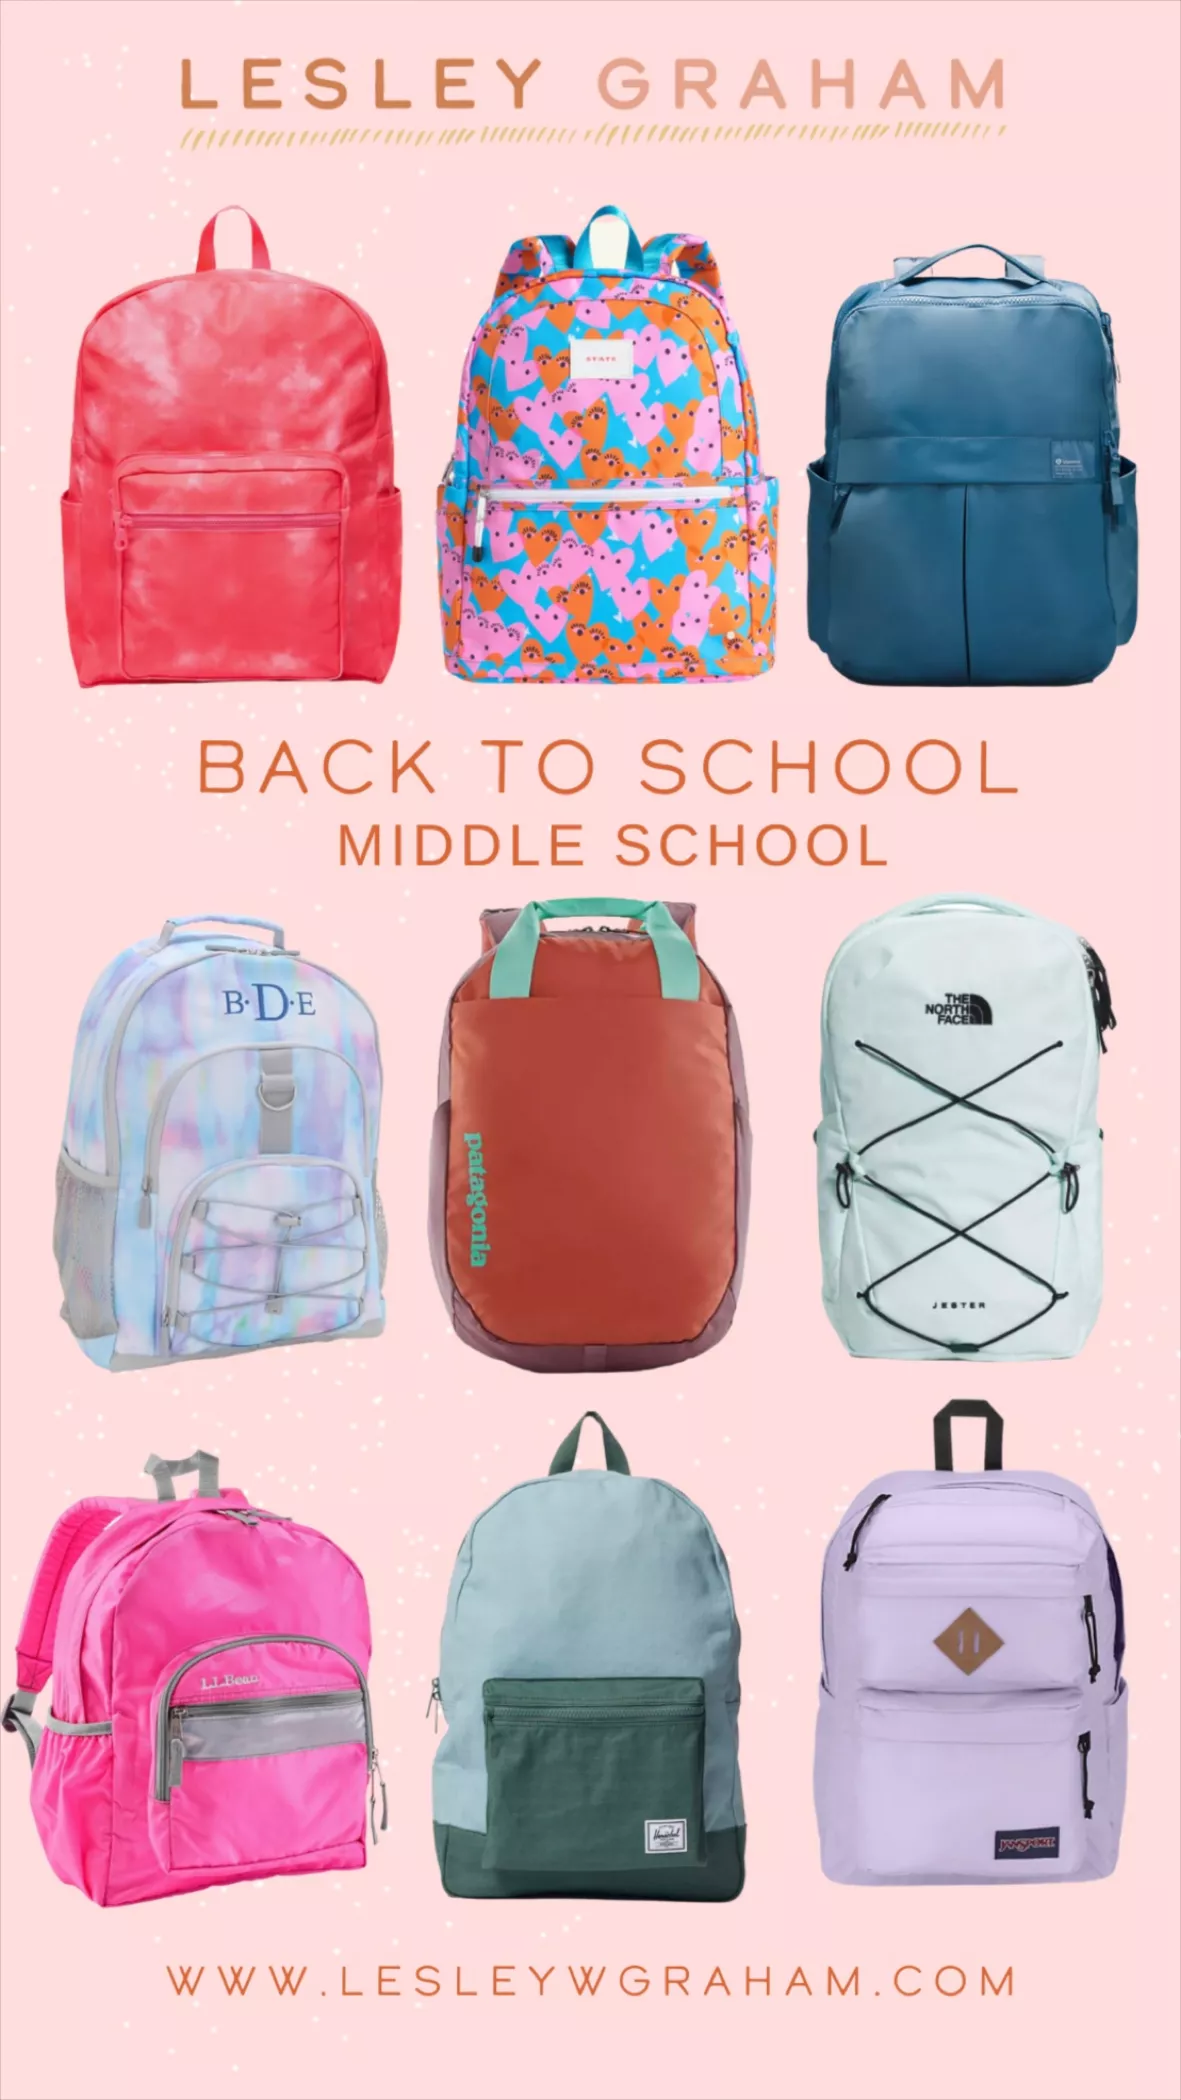 Go Back To School With The Hottest Bags!